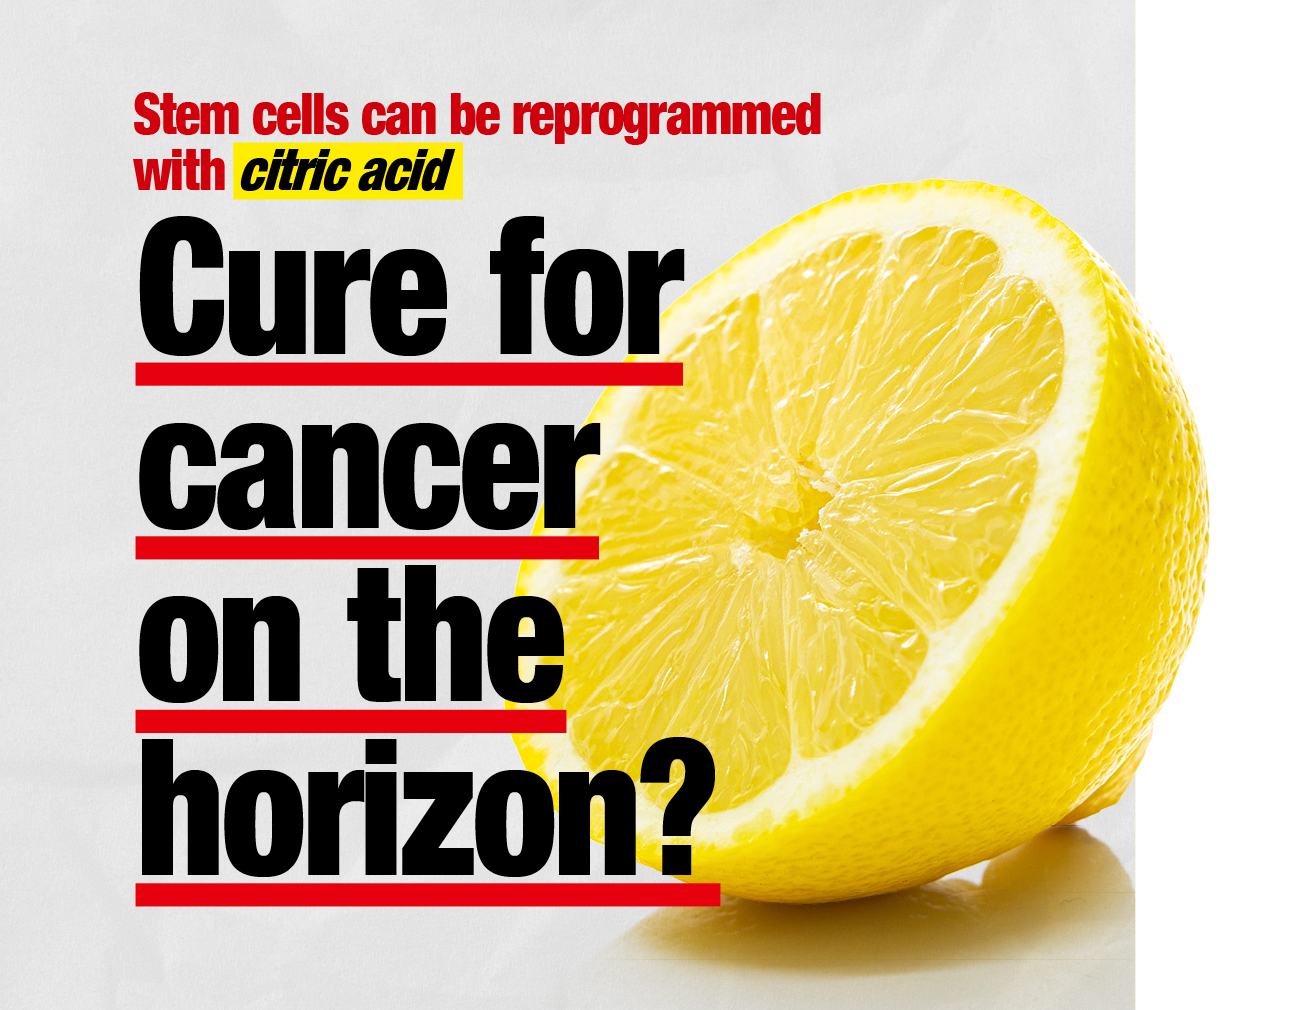 Stem cells can be reprogrammed with citric acid